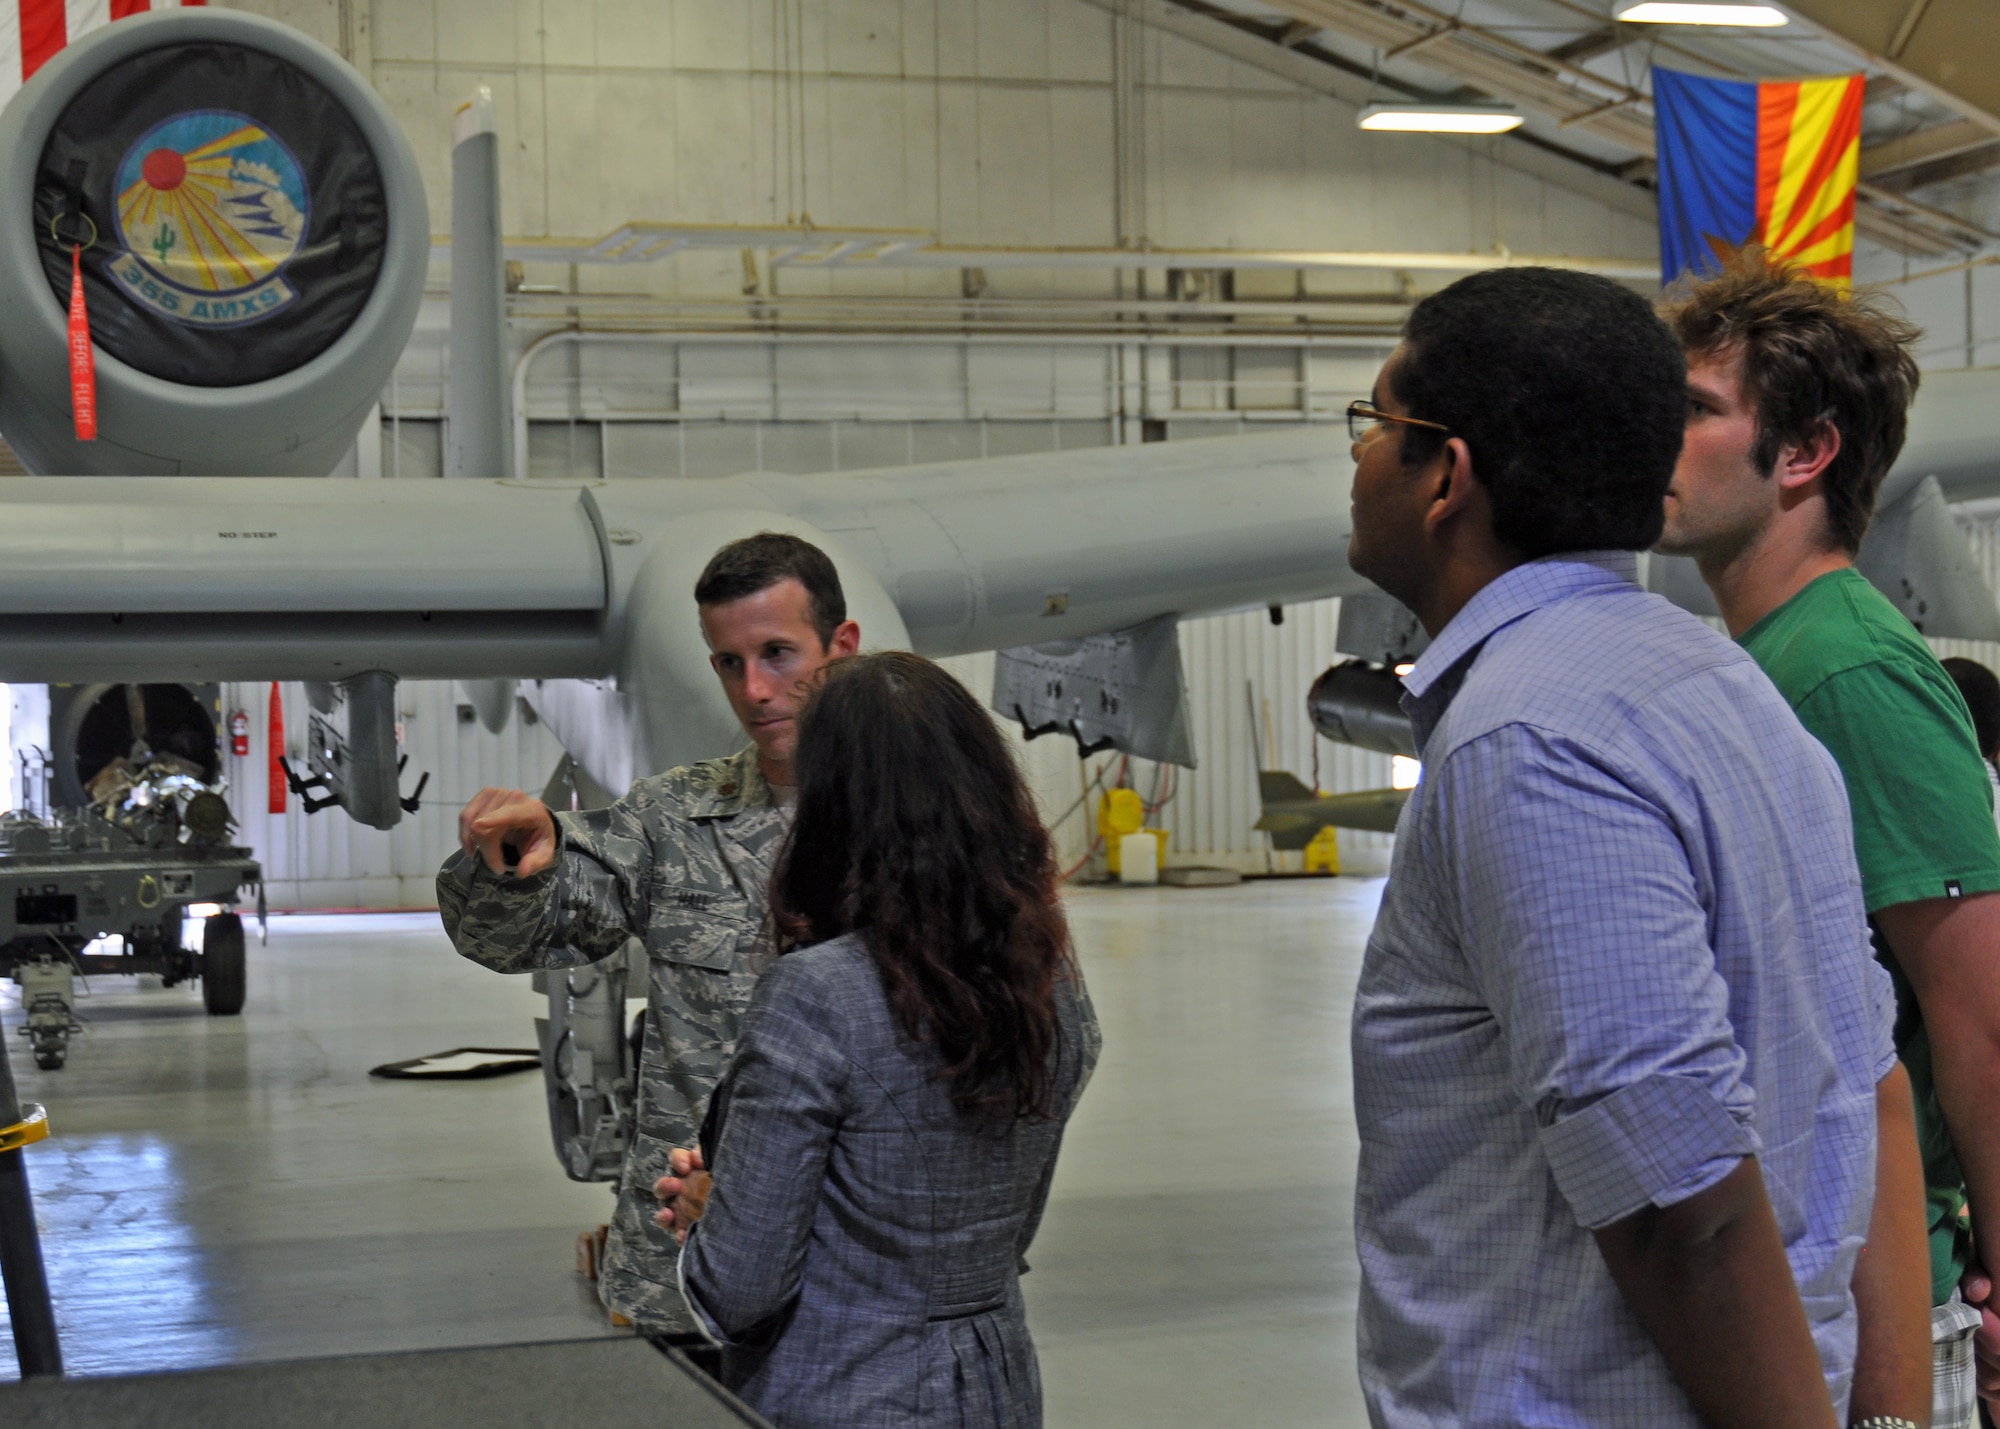 Graduate and doctoral engineering students from Brazil discuss the capabilities of the U.S. Air Force A-10 Thunderbolt II with Maj. Sean Hall, an A-10 pilot assigned to Headquarters Twelfth Air Force (Air Forces Southern), at Davis-Monthan Air Force Base, July 24. The students were in Tucson, Ariz., visiting the nearby Raytheon Company as part of Brazil’s Science Without Borders program and requested the opportunity to visit D-M.  The A-10 is a close air support aircraft that has proven invaluable to the United States and its allies in operations including Desert Storm, Southern Watch, Provide Comfort, Desert Fox, Noble Anvil, Deny Flight, Deliberate Guard, Allied Force, Enduring Freedom and Iraqi Freedom. (U.S. Air Force photo/Capt. Jonathan Simmons)